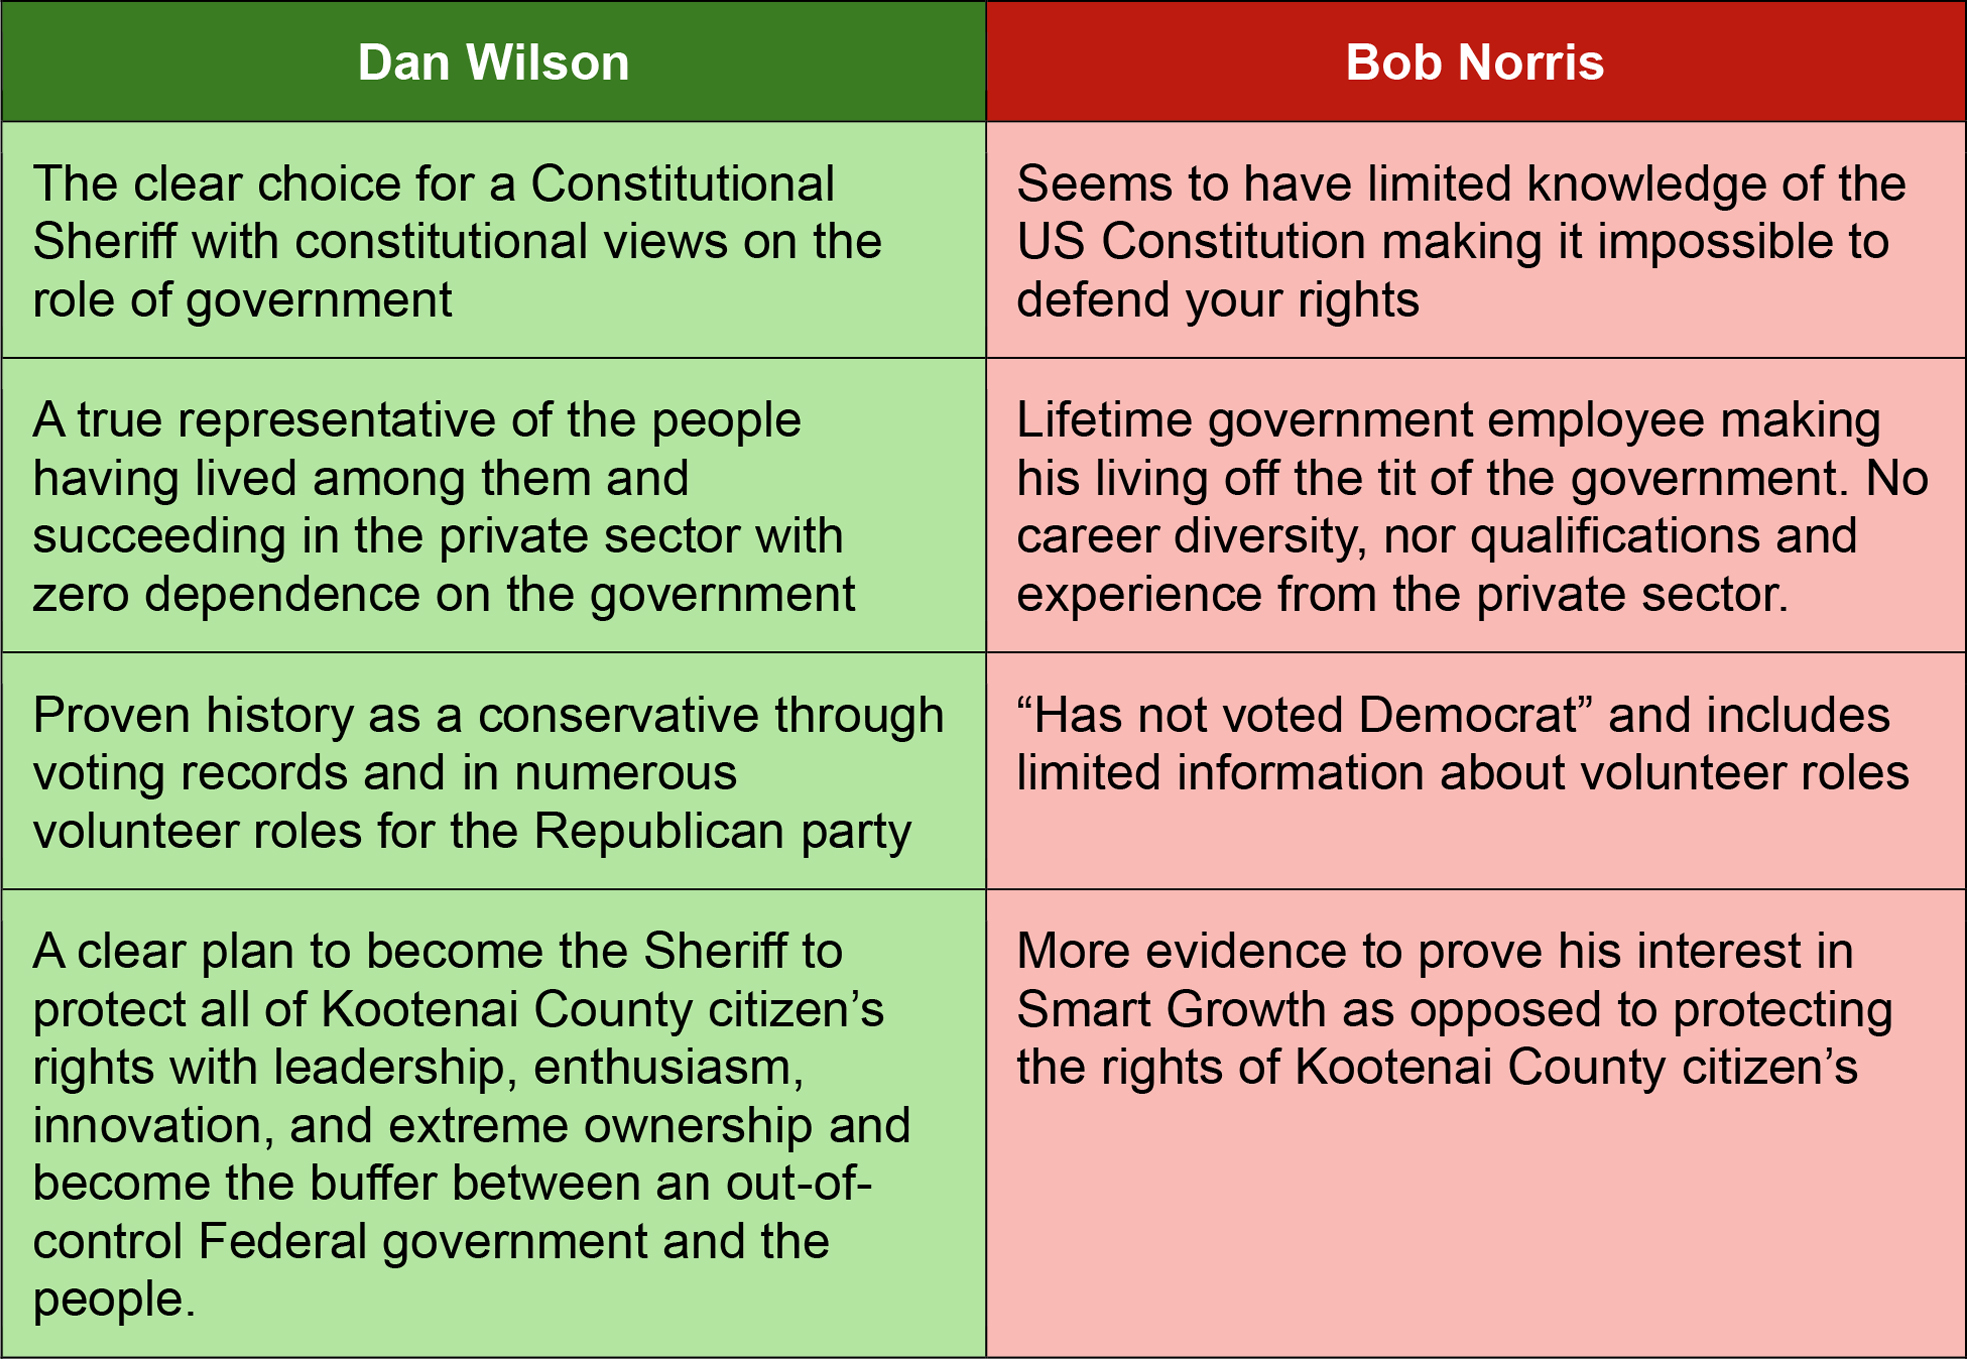 Dan Wilson proves he is the most conservative choice of a Constitutional Sheriff for Kootenai County